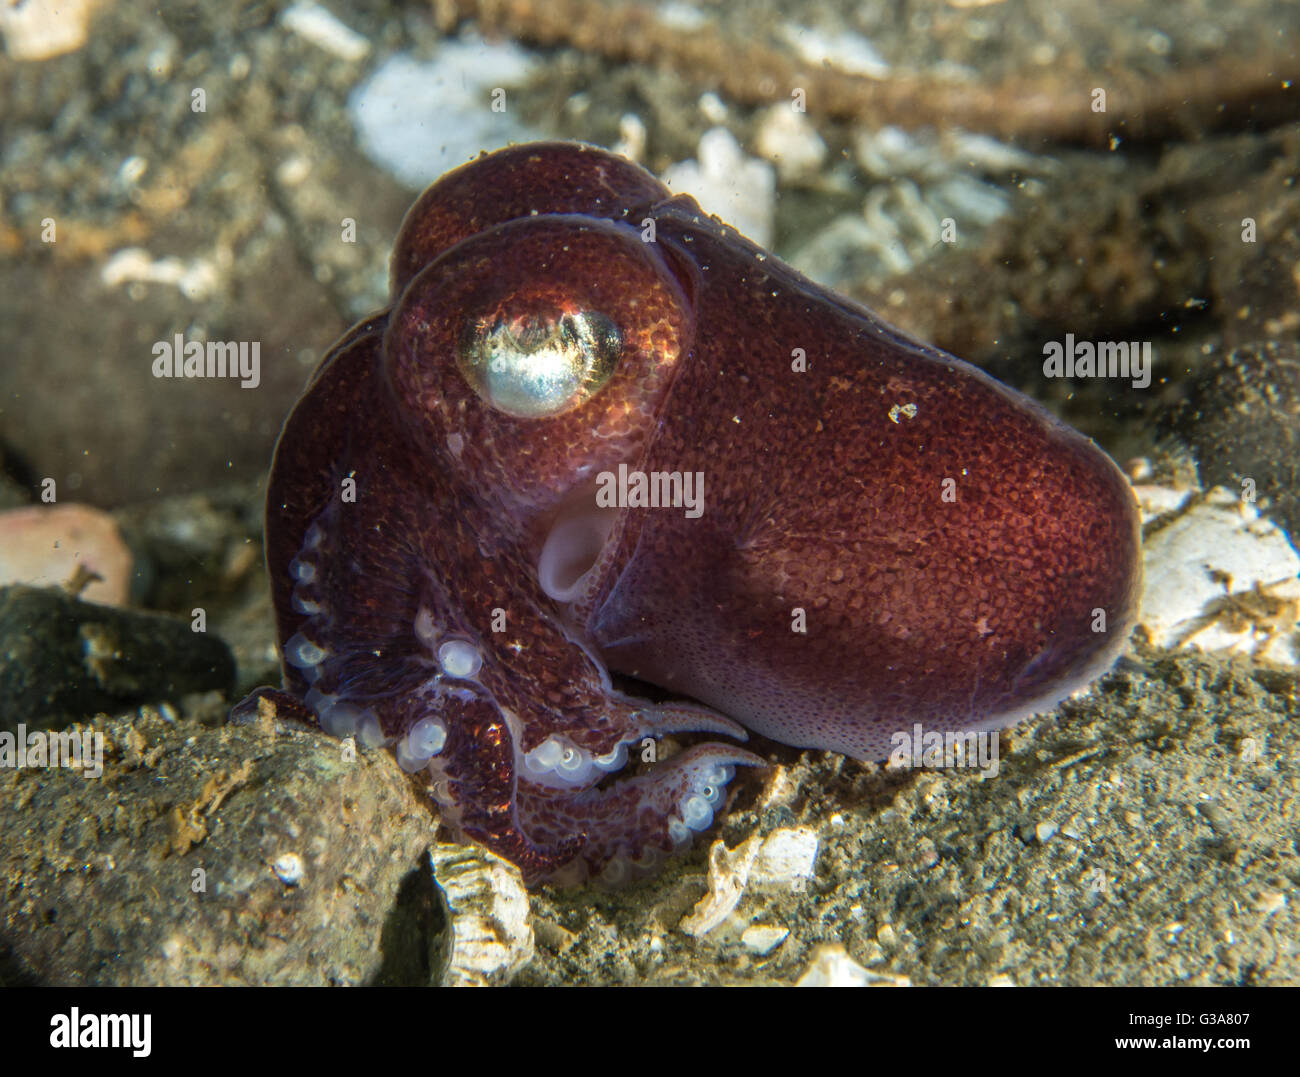 Stubby Tintenfisch, Rossia Pacifica in Seacrest Park, Bucht 3, Seattle. Stockfoto